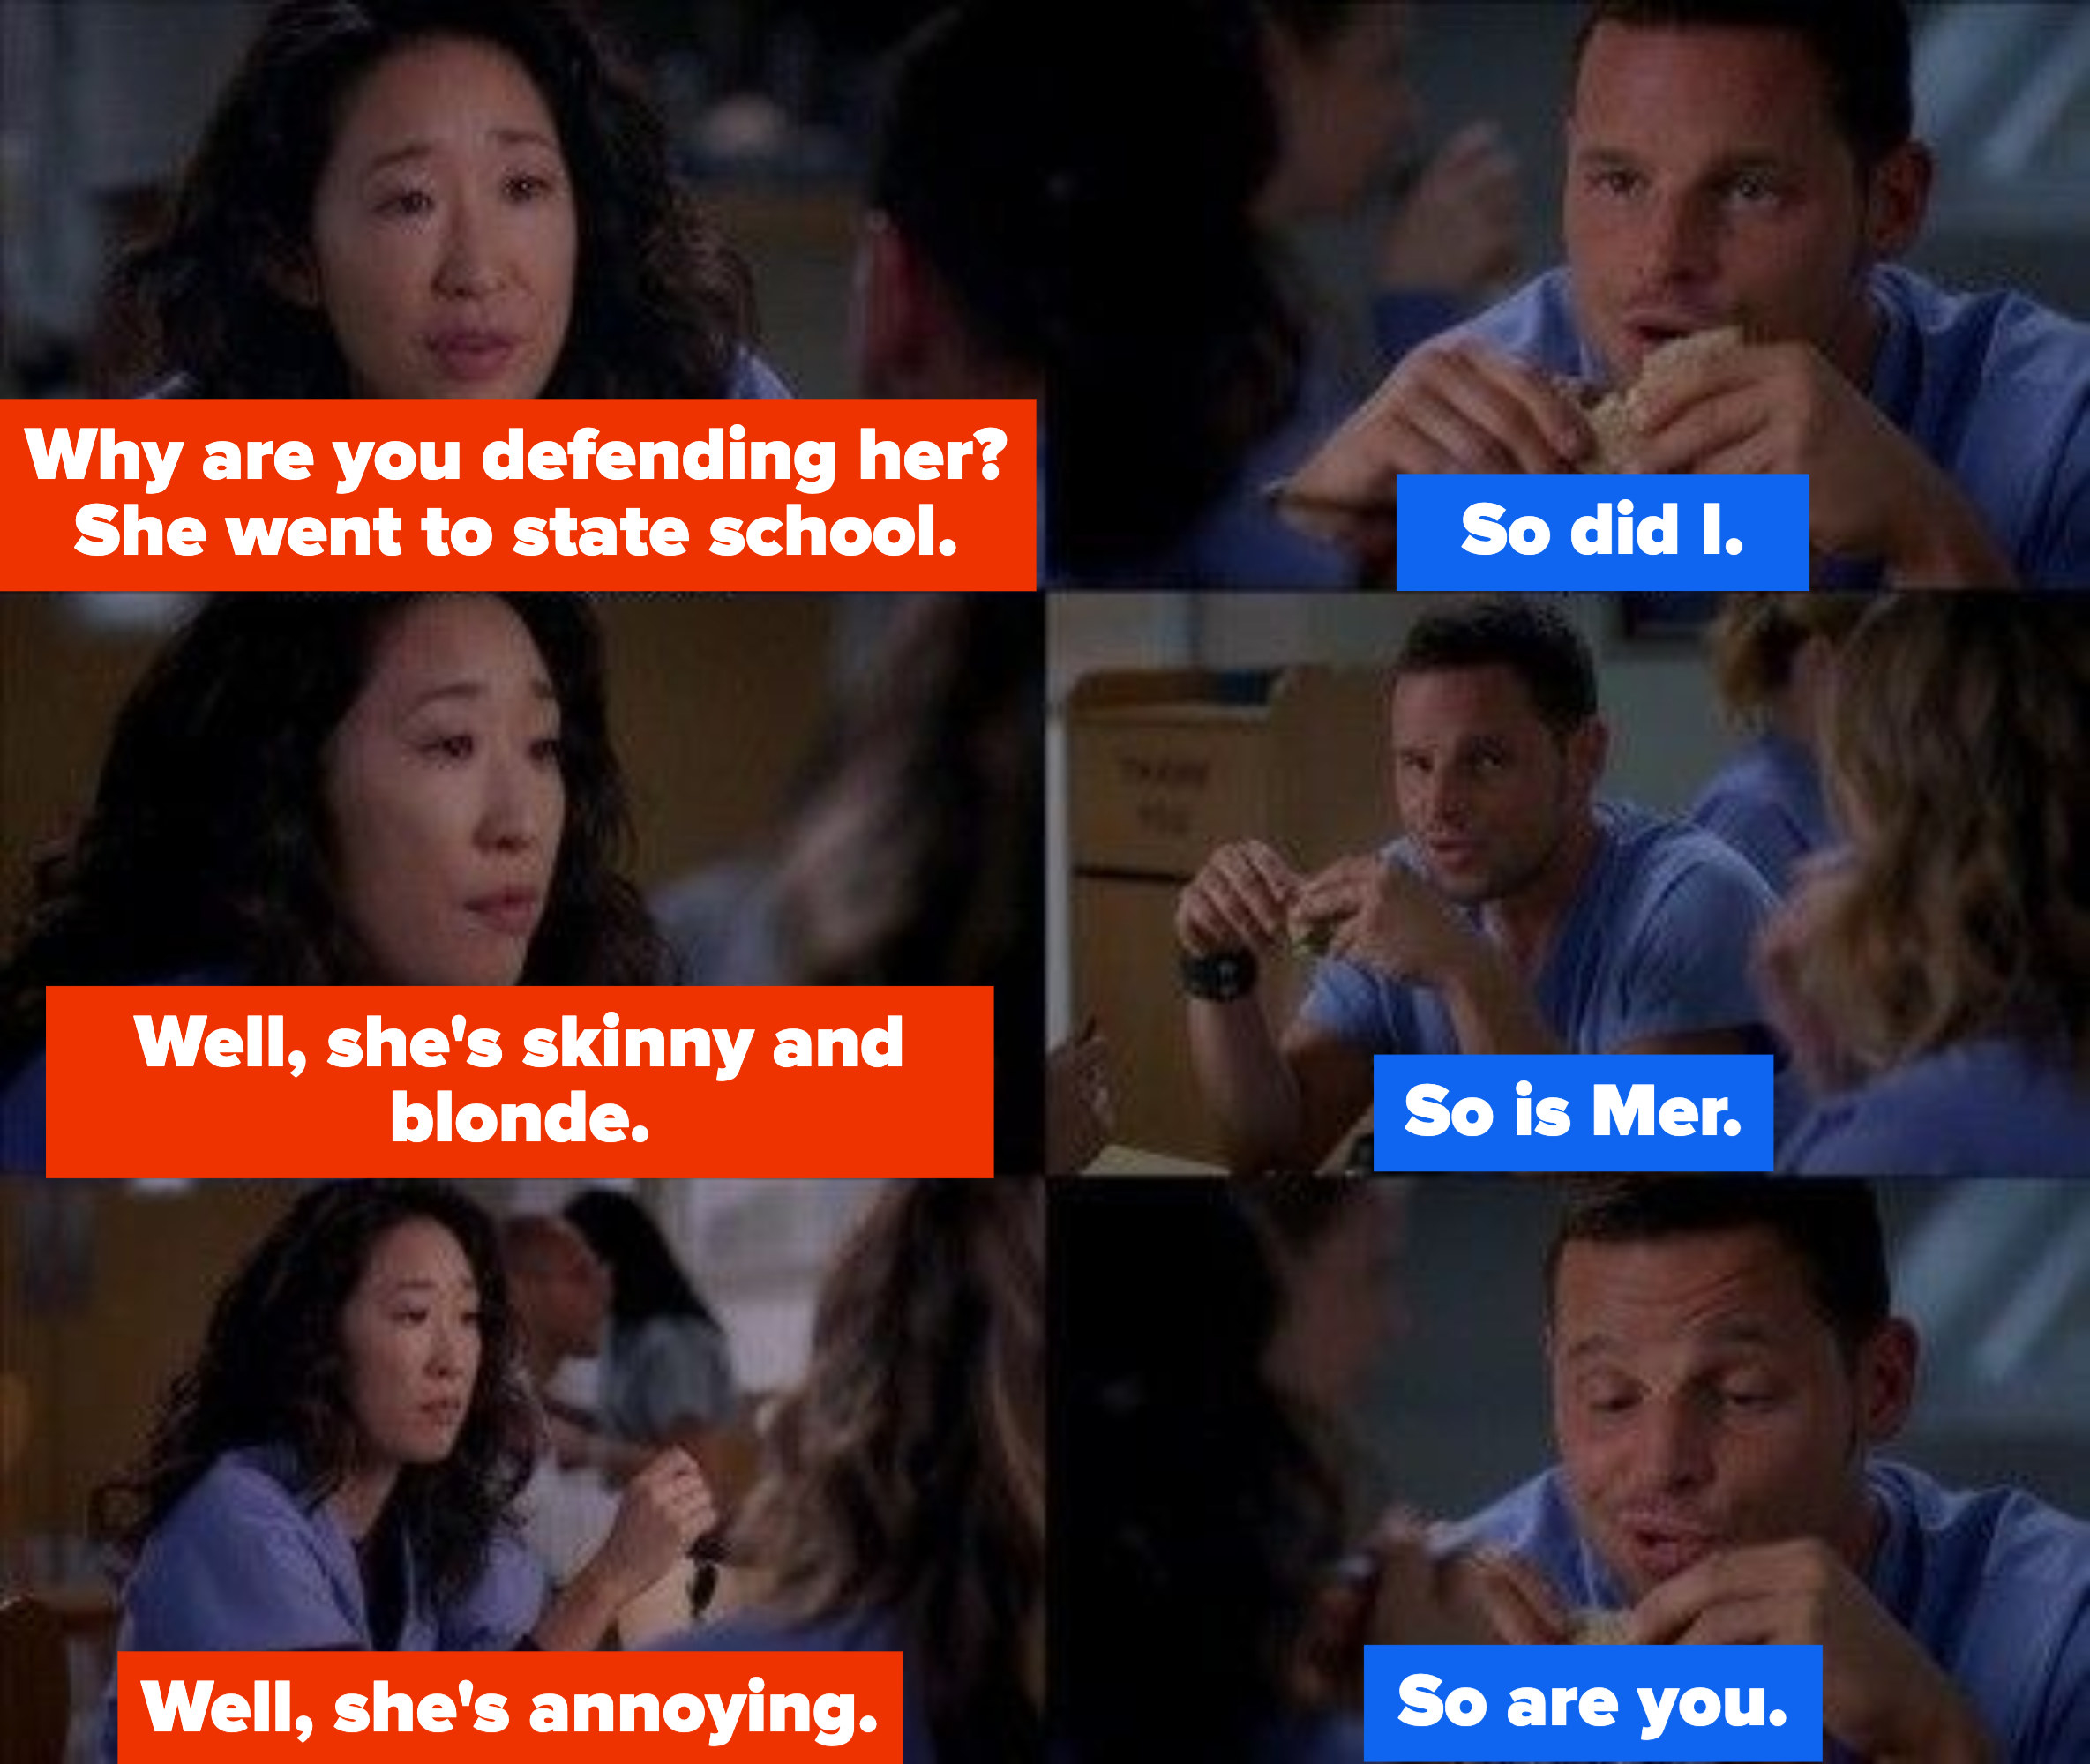 Cristina asks why Alex is defending Teddy when she went to state school and Alex says he did too. Then Christina says she&#x27;s skinny and blonde and Alex says Meredith is too. And then Cristina says she&#x27;s annoying and Alex says so is Cristina